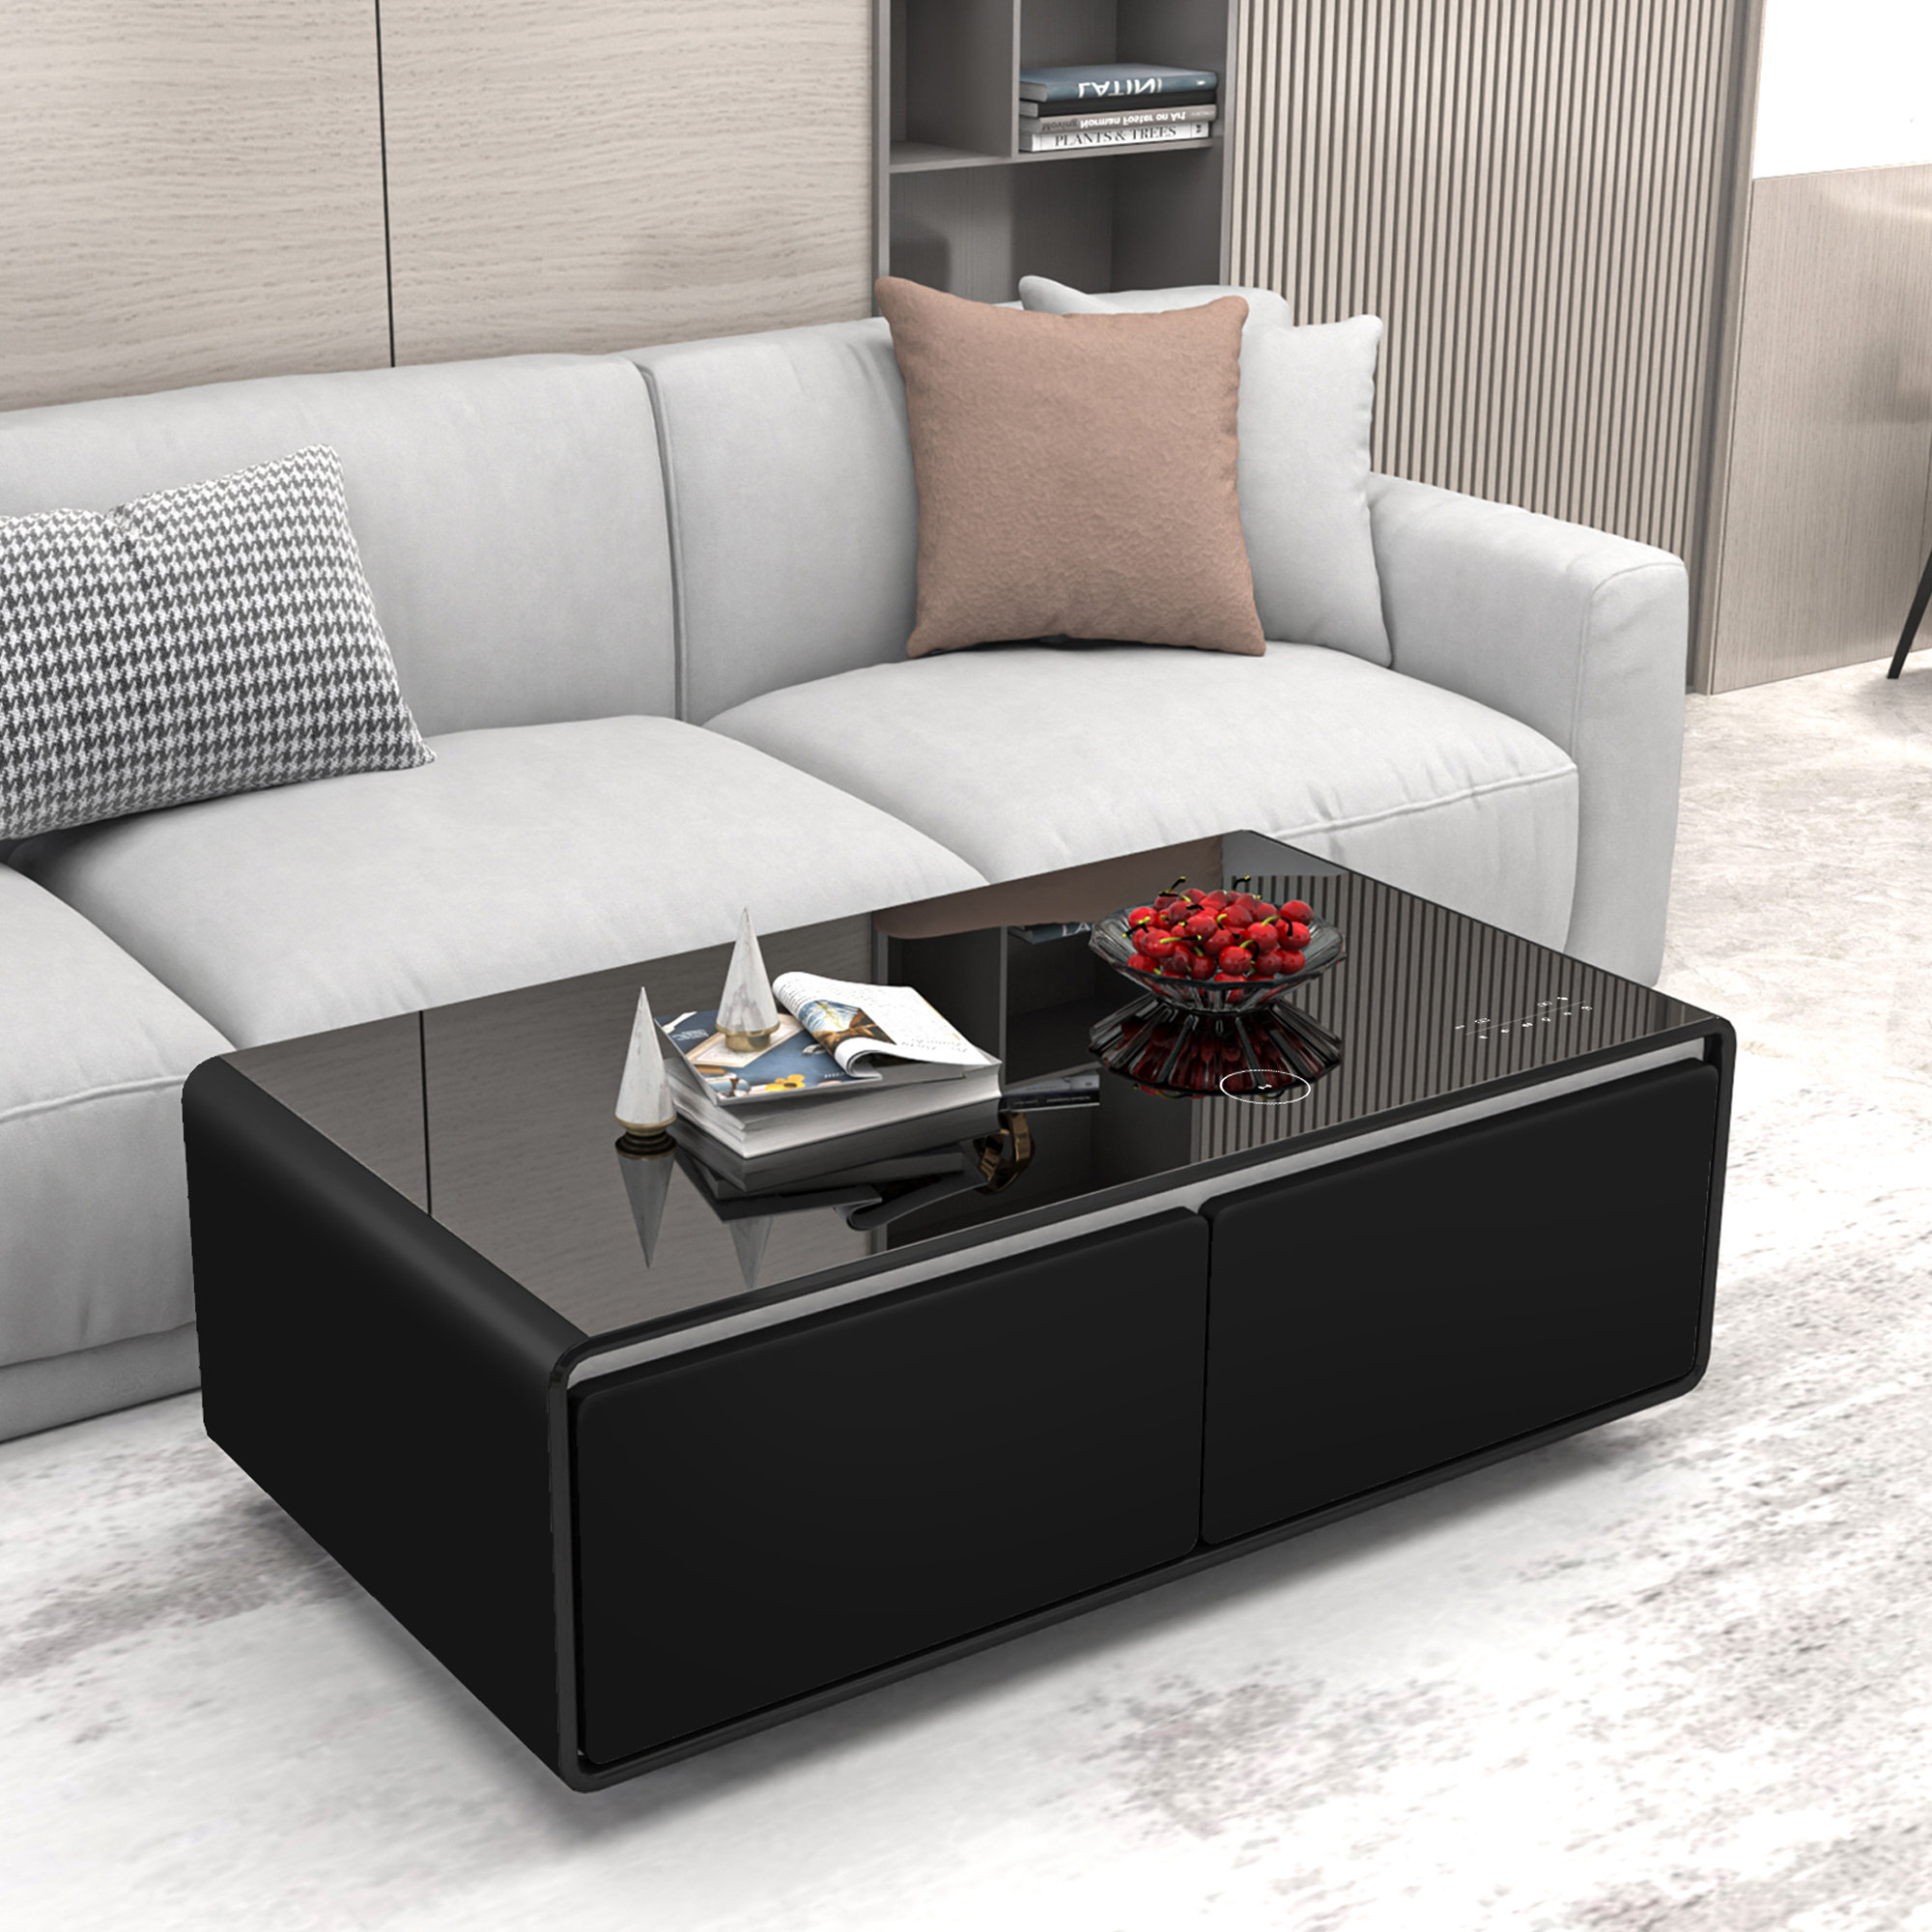 Sobro Coffee Table with Built in Fridge Speakers Outlets LED Light